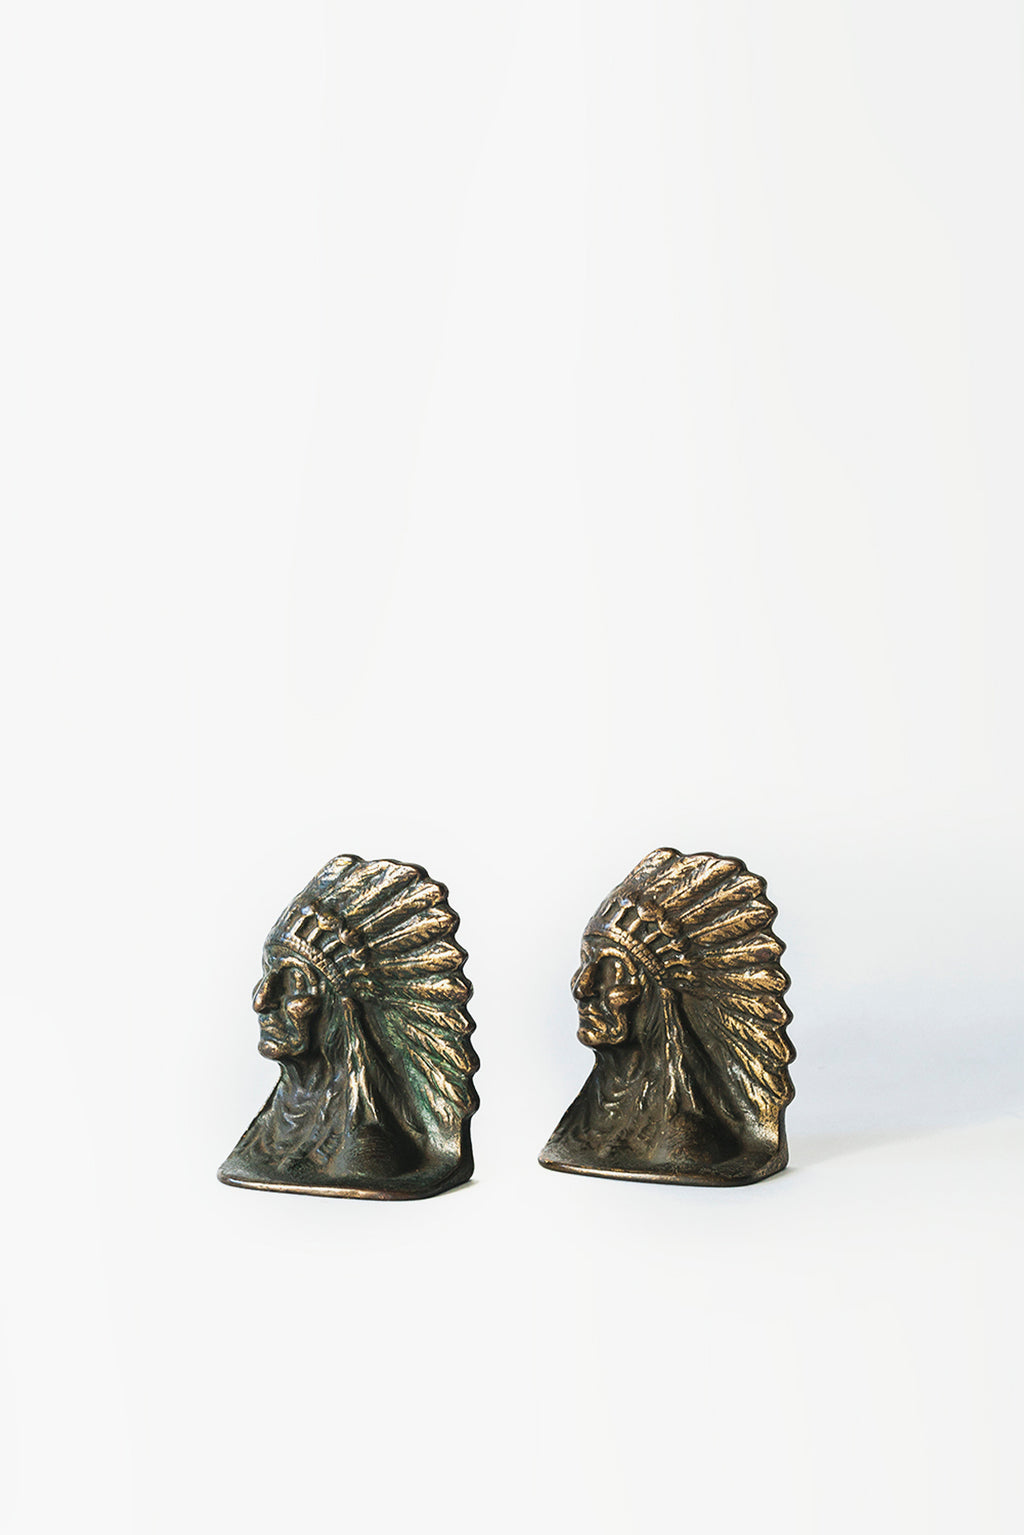 BOOK STAND "Indian Chief Head"